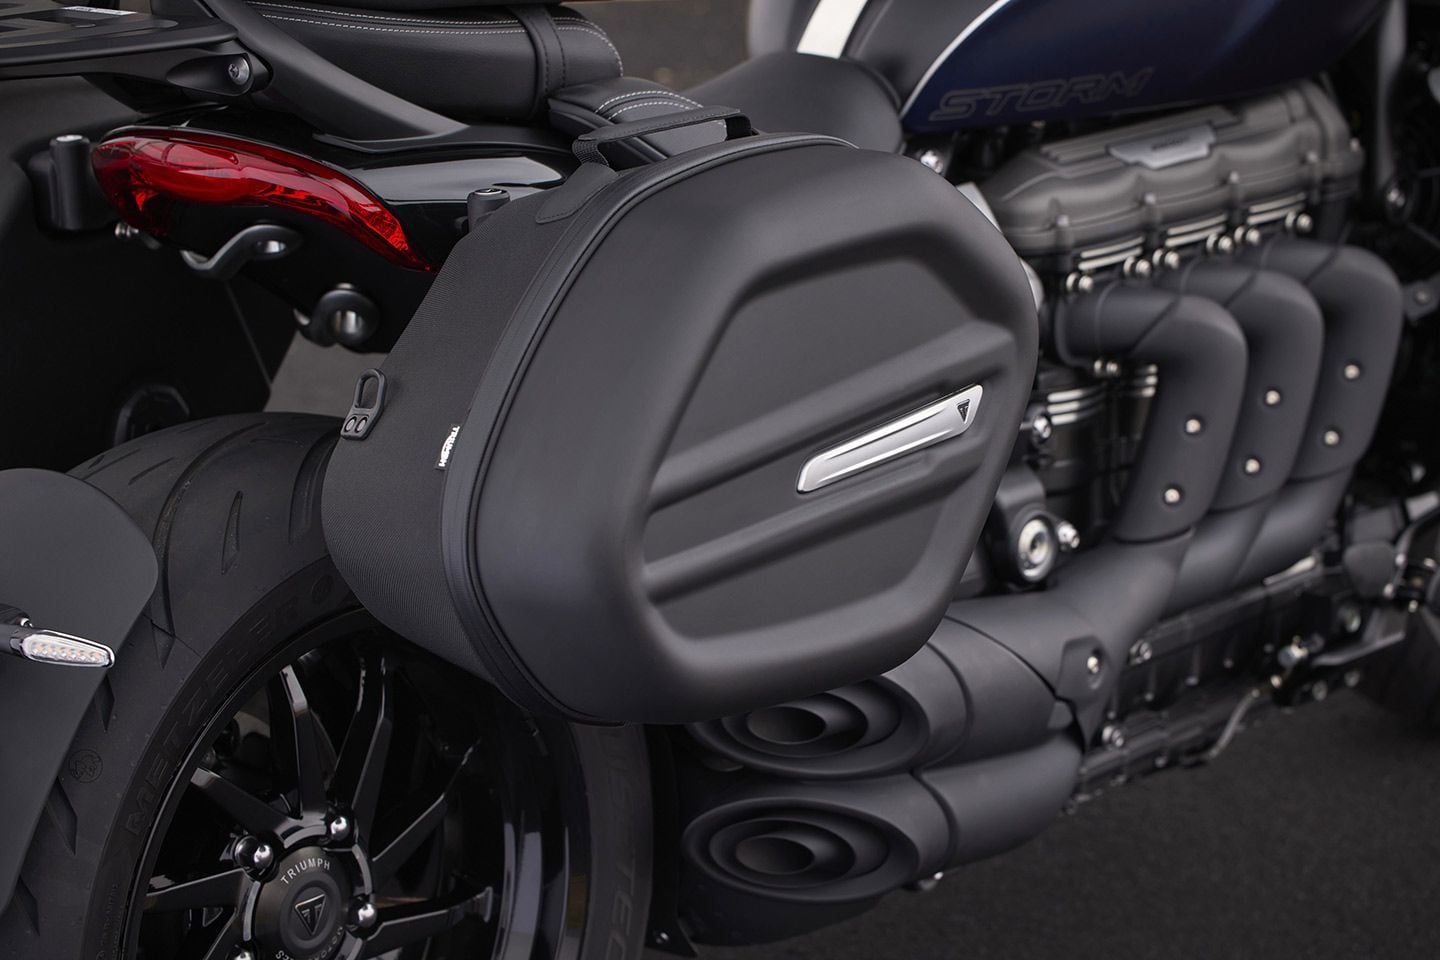 Triumph says you’ll be able to choose from over 50 accessories for the Storm models, including things like luggage.